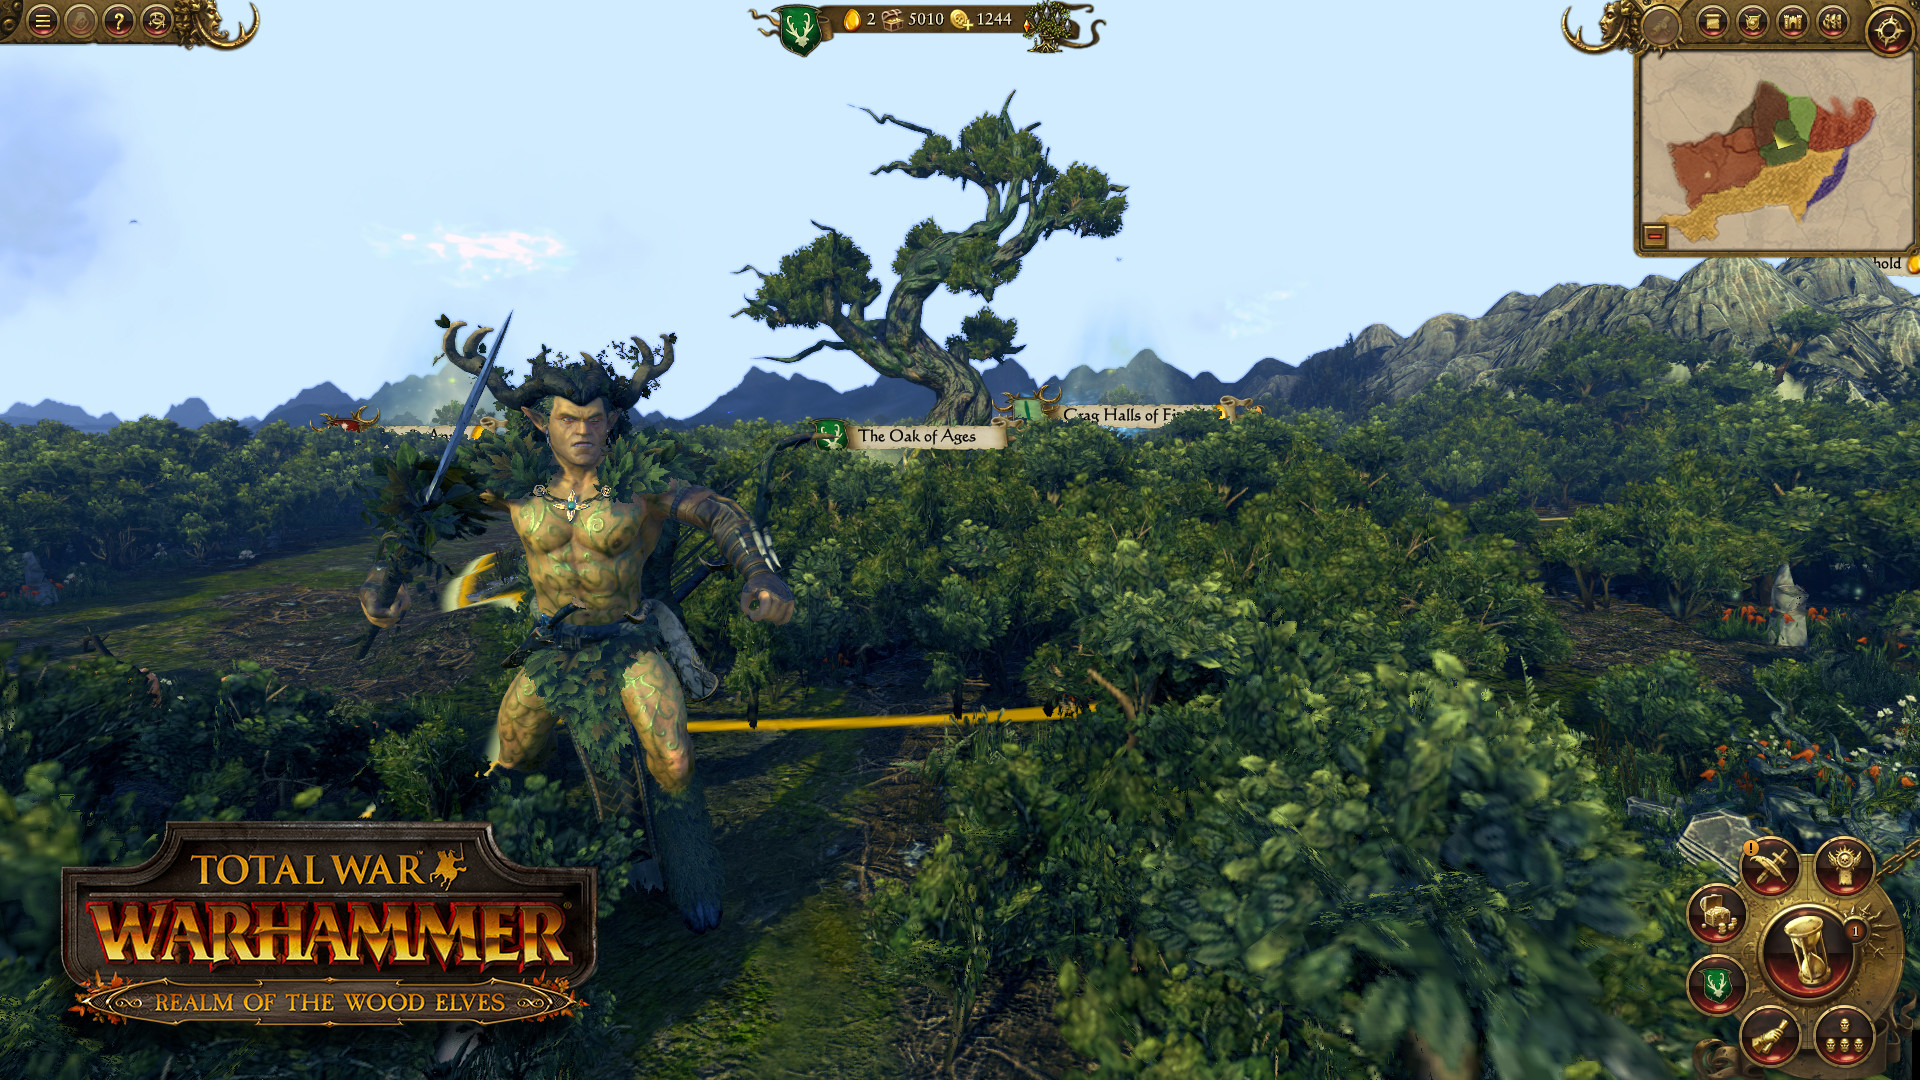 Total War: WARHAMMER - Realm of The Wood Elves on Steam